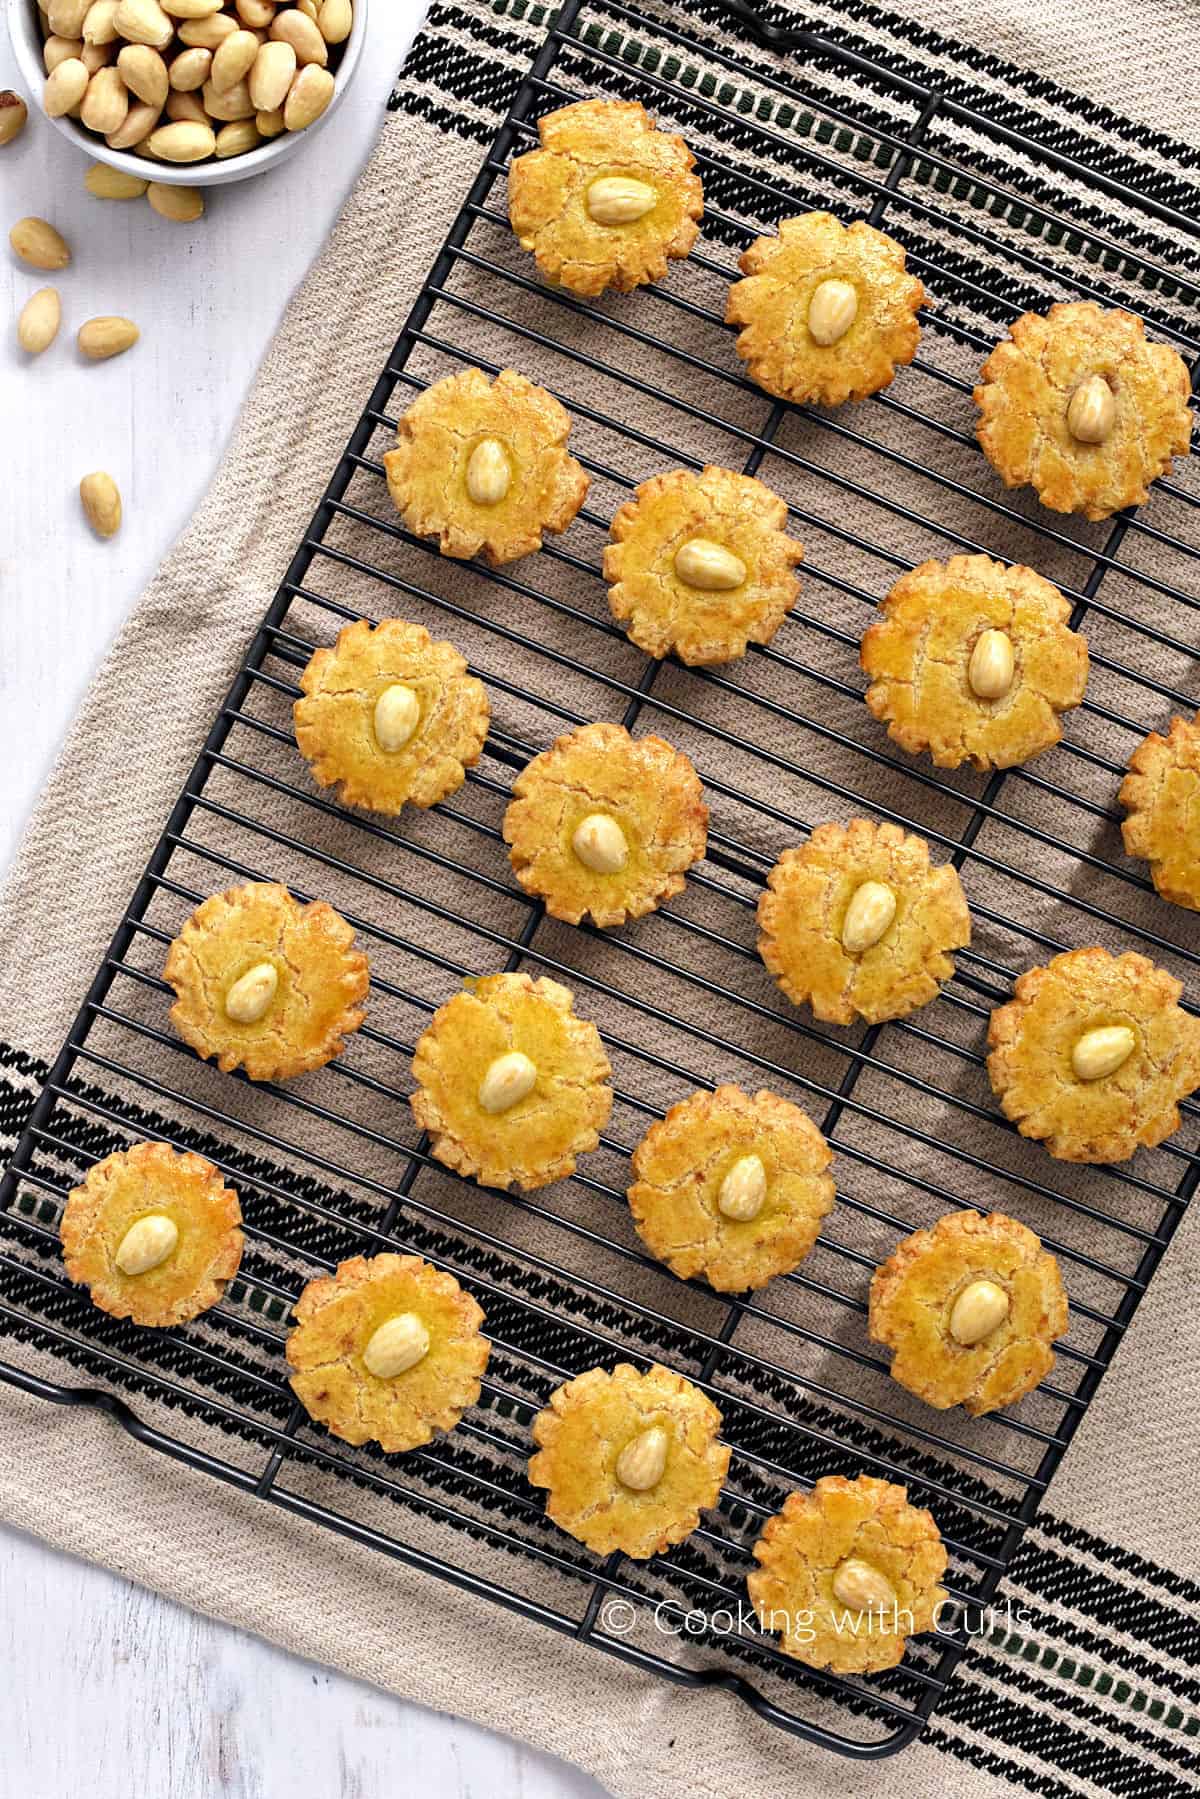 Nineteen Chinese almond cookies on a wire cooling rack over a dish towel with a bowl of raw almonds in the upper left corner.